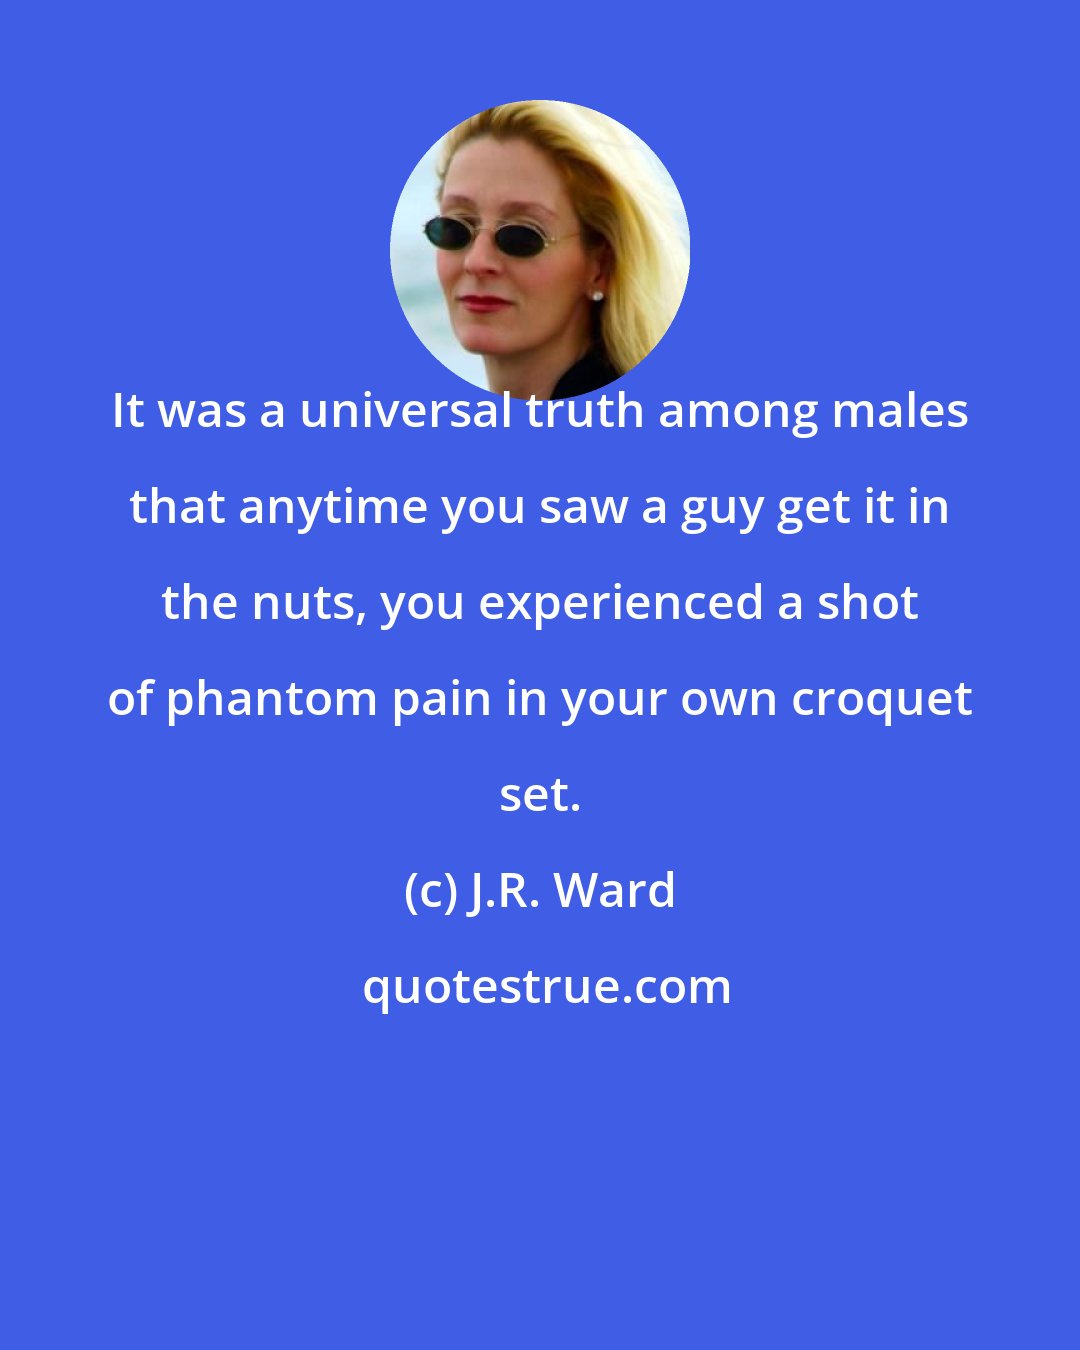 J.R. Ward: It was a universal truth among males that anytime you saw a guy get it in the nuts, you experienced a shot of phantom pain in your own croquet set.